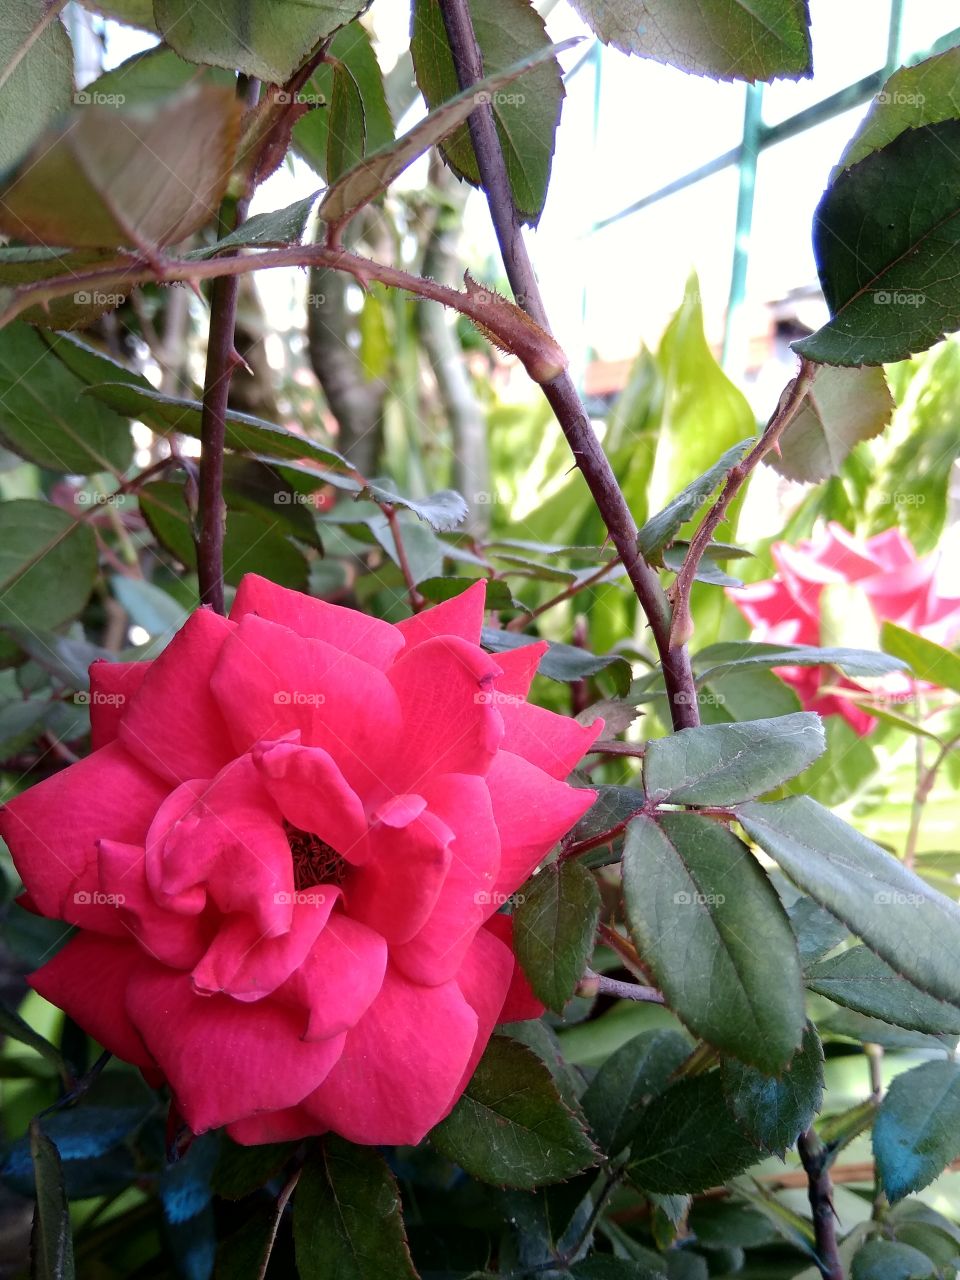 Vibrant rose flower. The view of it gives me a very good day. The weather is good too. It's a bit windy but I managed to take these photos.